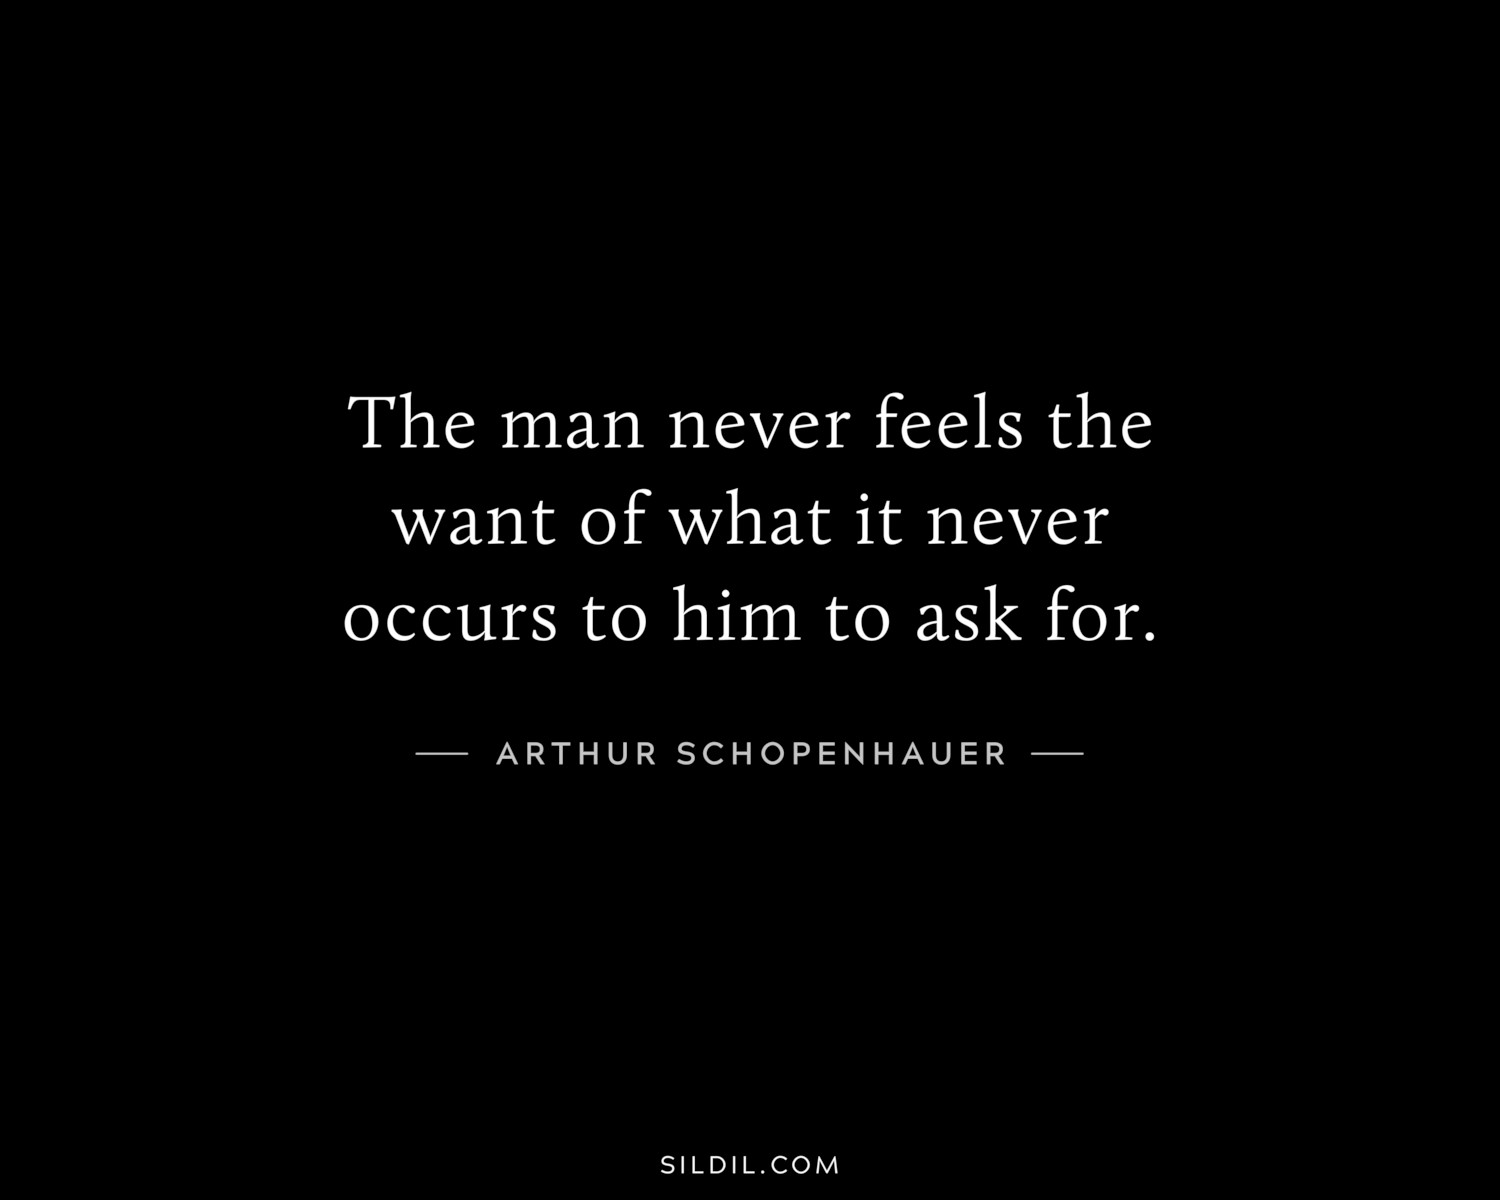 The man never feels the want of what it never occurs to him to ask for.